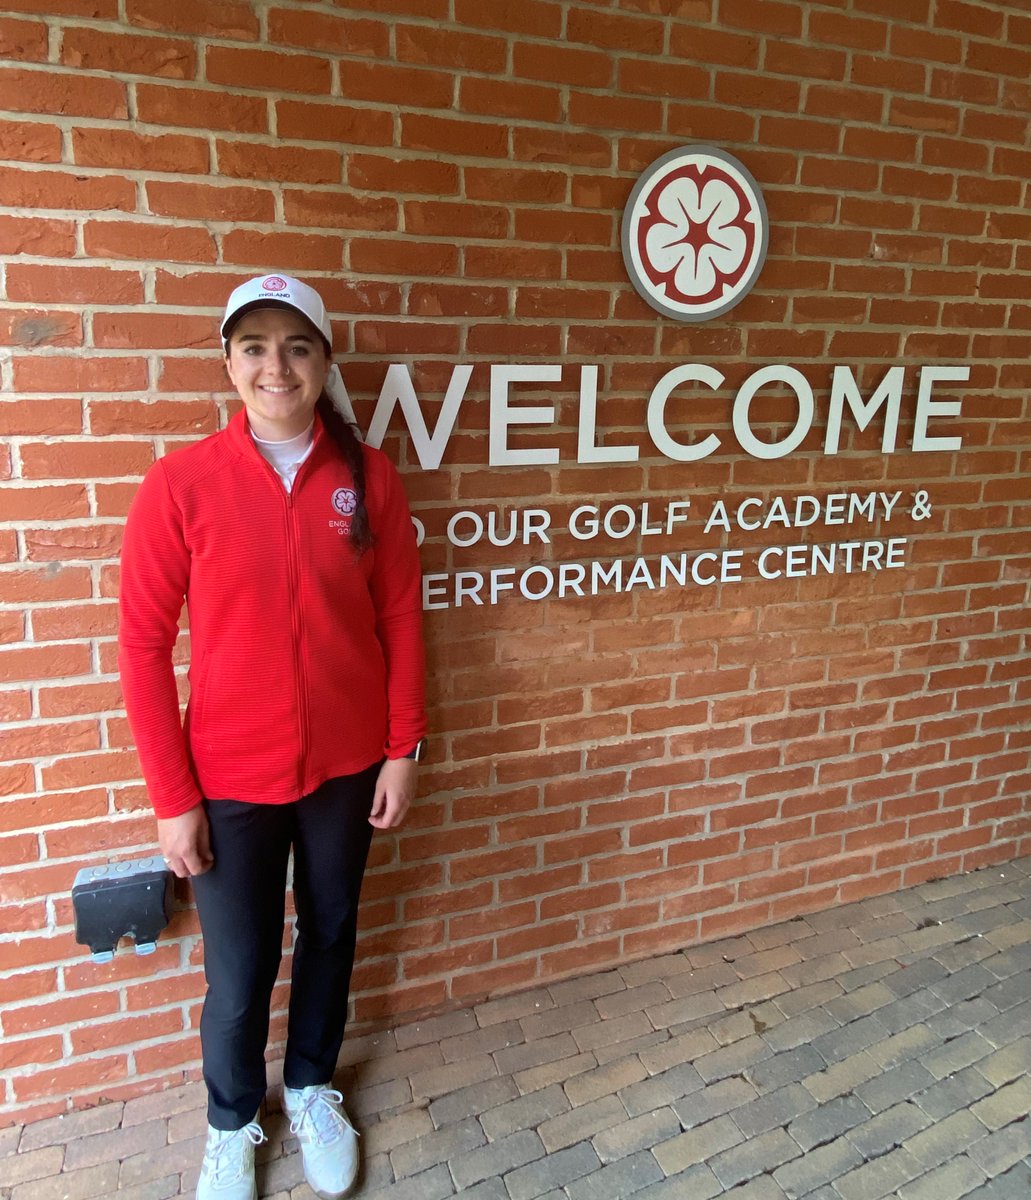 Congratulations to @EmmaCharlotte97 winner of the Women & Girls’ Invitational @woodhallspagolf this weekend. The @stonehamgc player fought off the challenge from 7 England team-mates to top the leaderboard - look out for a special feature on this in the next podcast.